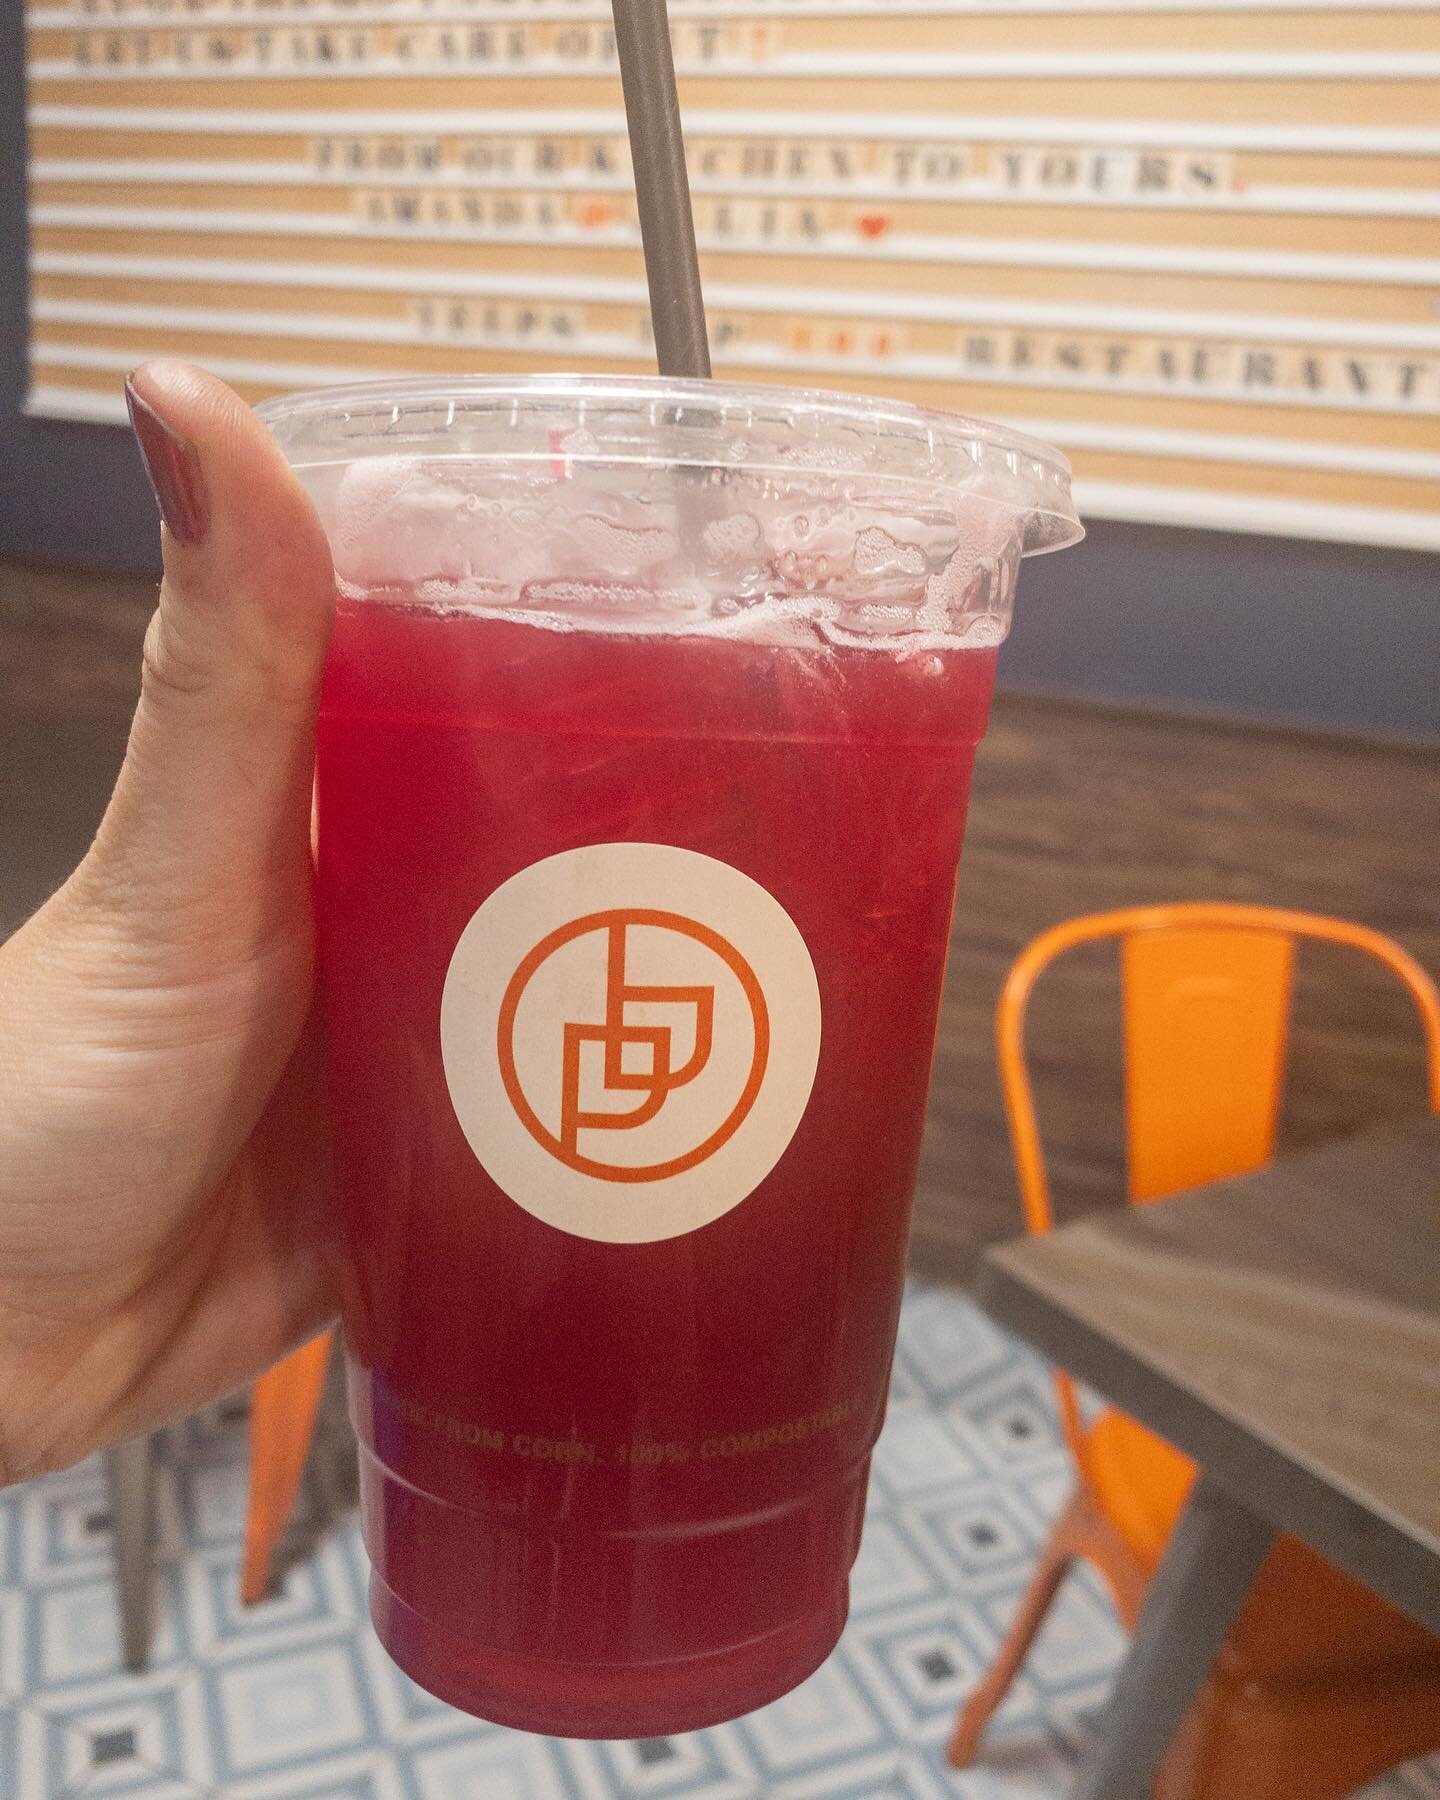 When life gives you cranberries&hellip; make cranberry lemonade. 

With extra juice from our cranberry sauce, we made homemade cranberry juice and mixed it with fresh squeezed lemonade. 

Available for a limited time only. 

#PorchBox #PorchBoxRestau